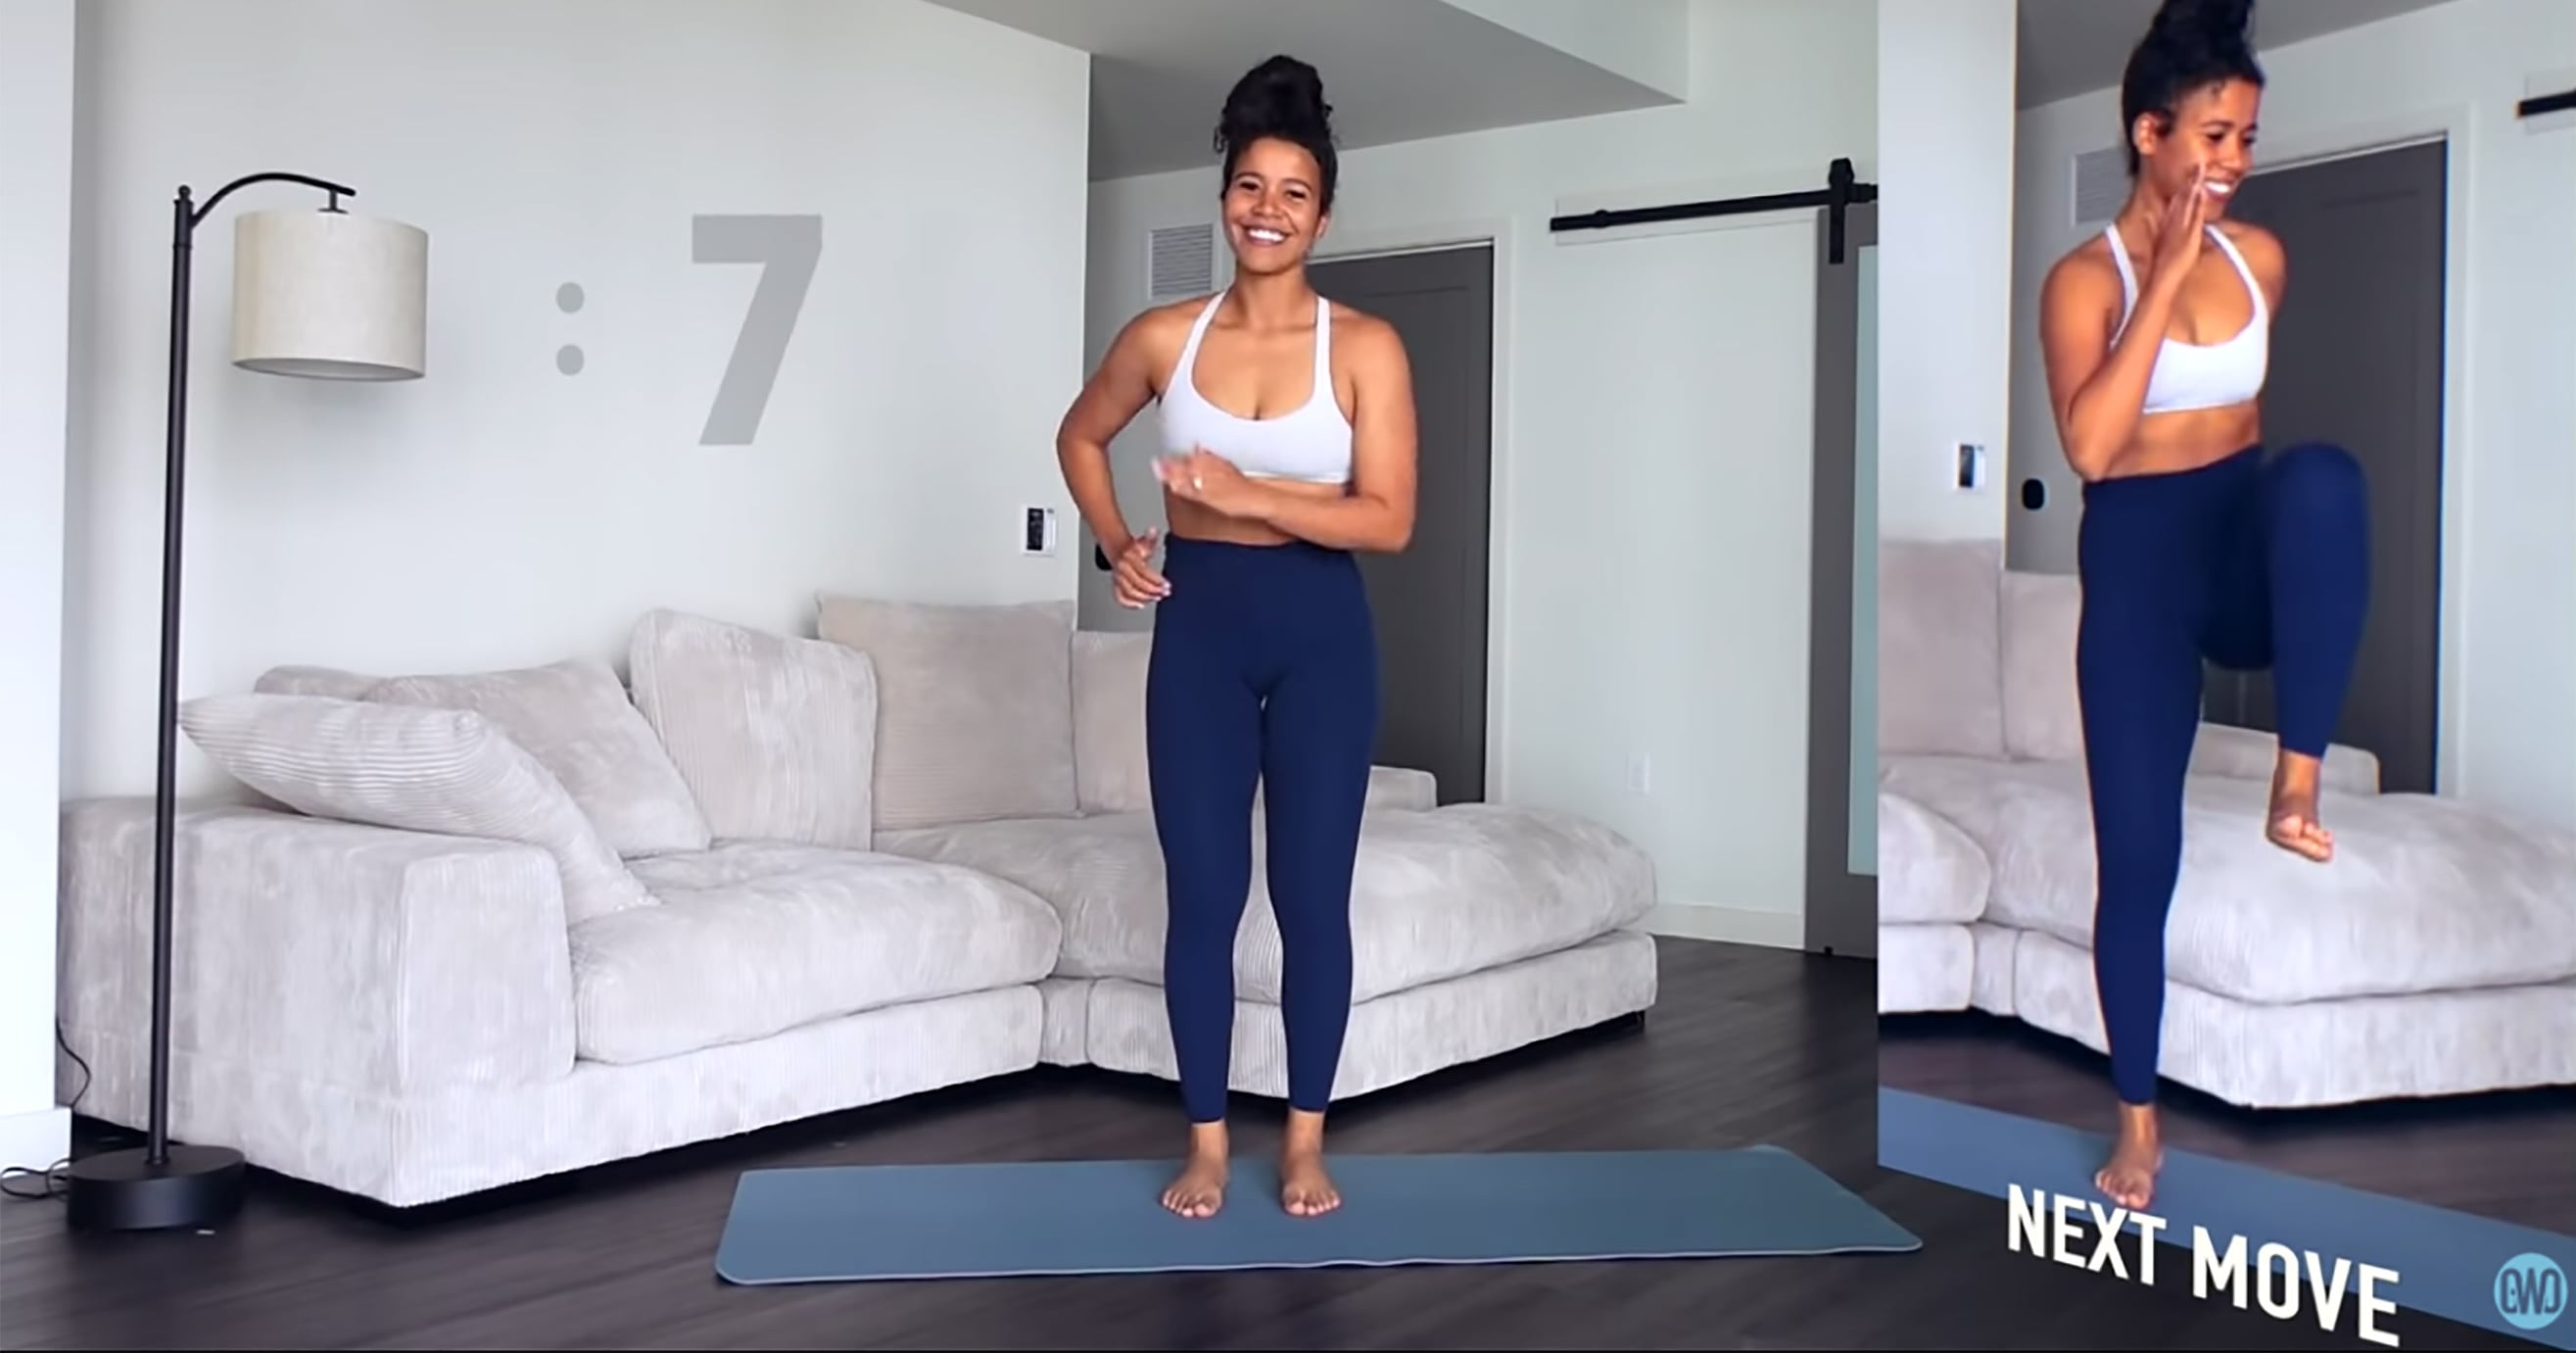 Dynamic Walking Workout  Walking In Place Workout for 21 Minutes